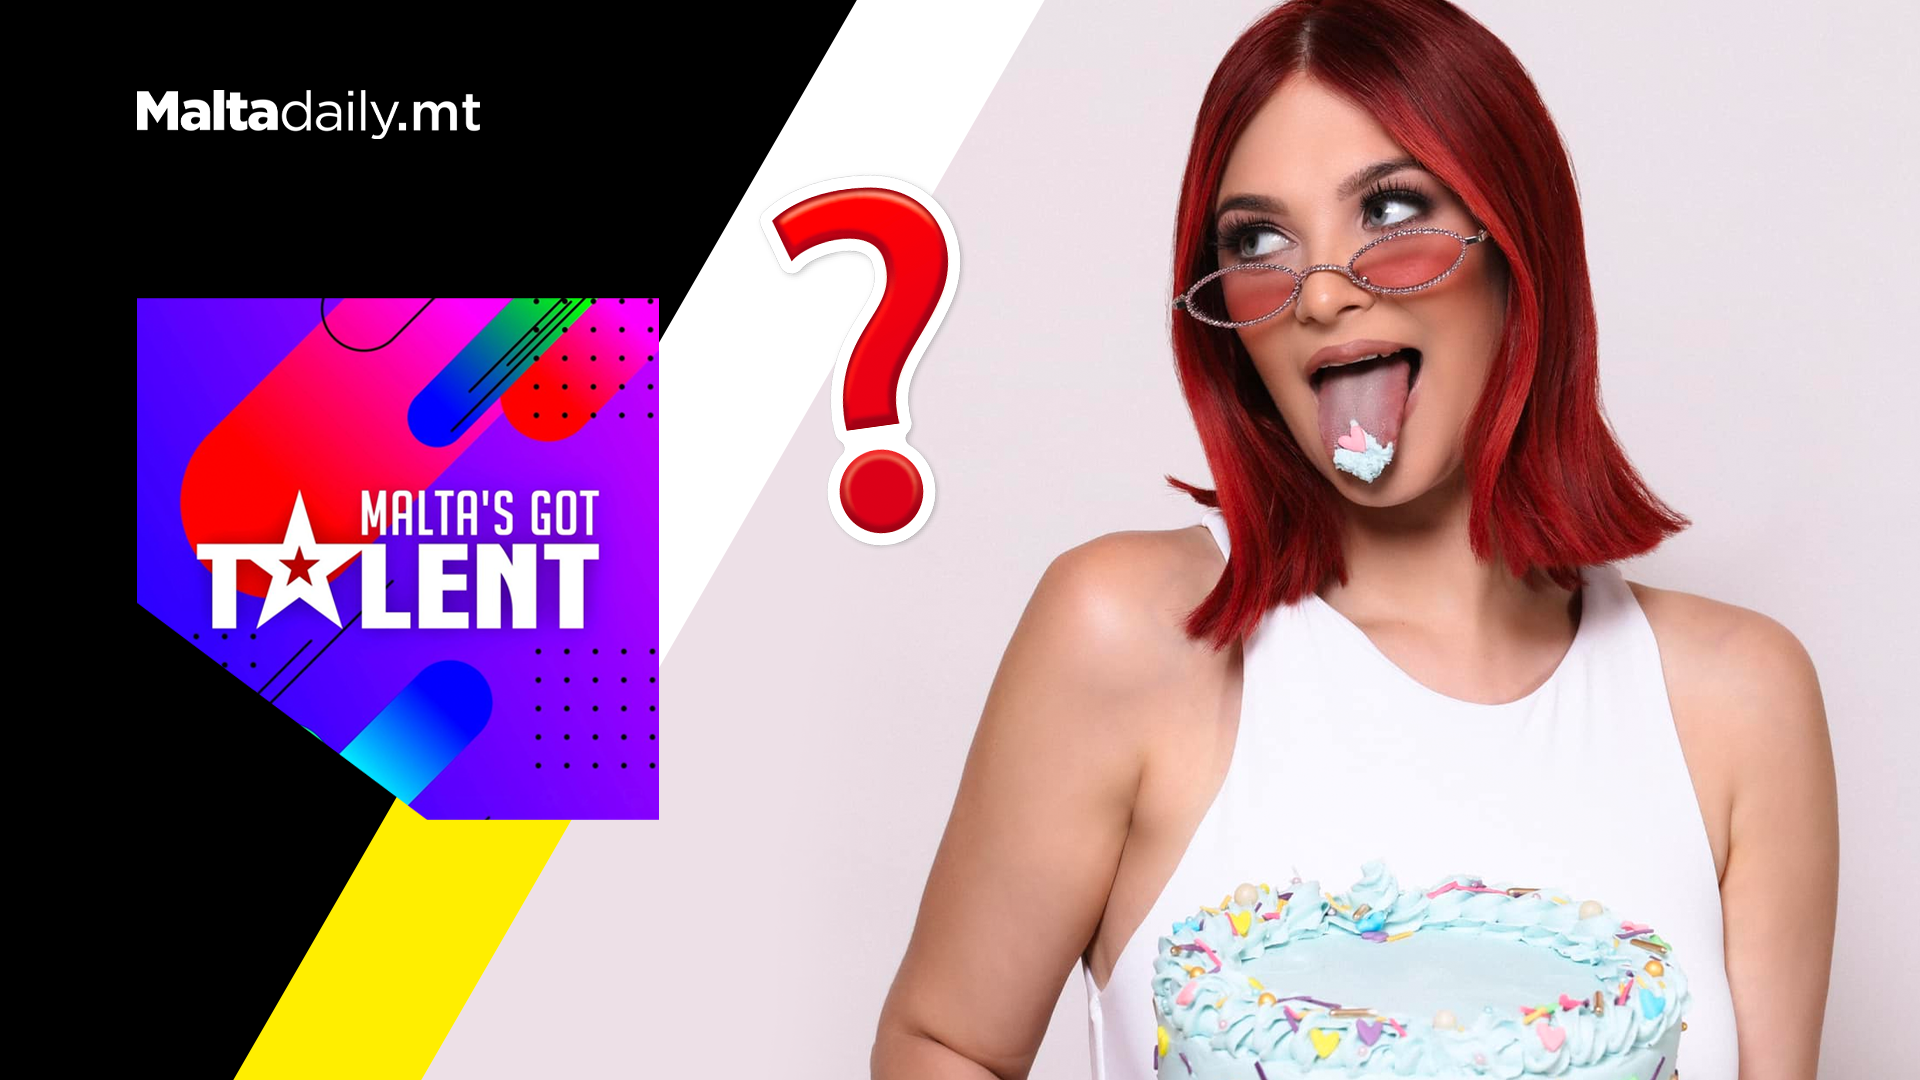 Valentina Rossi could be one of Malta's Got Talent's new Season 2 judges